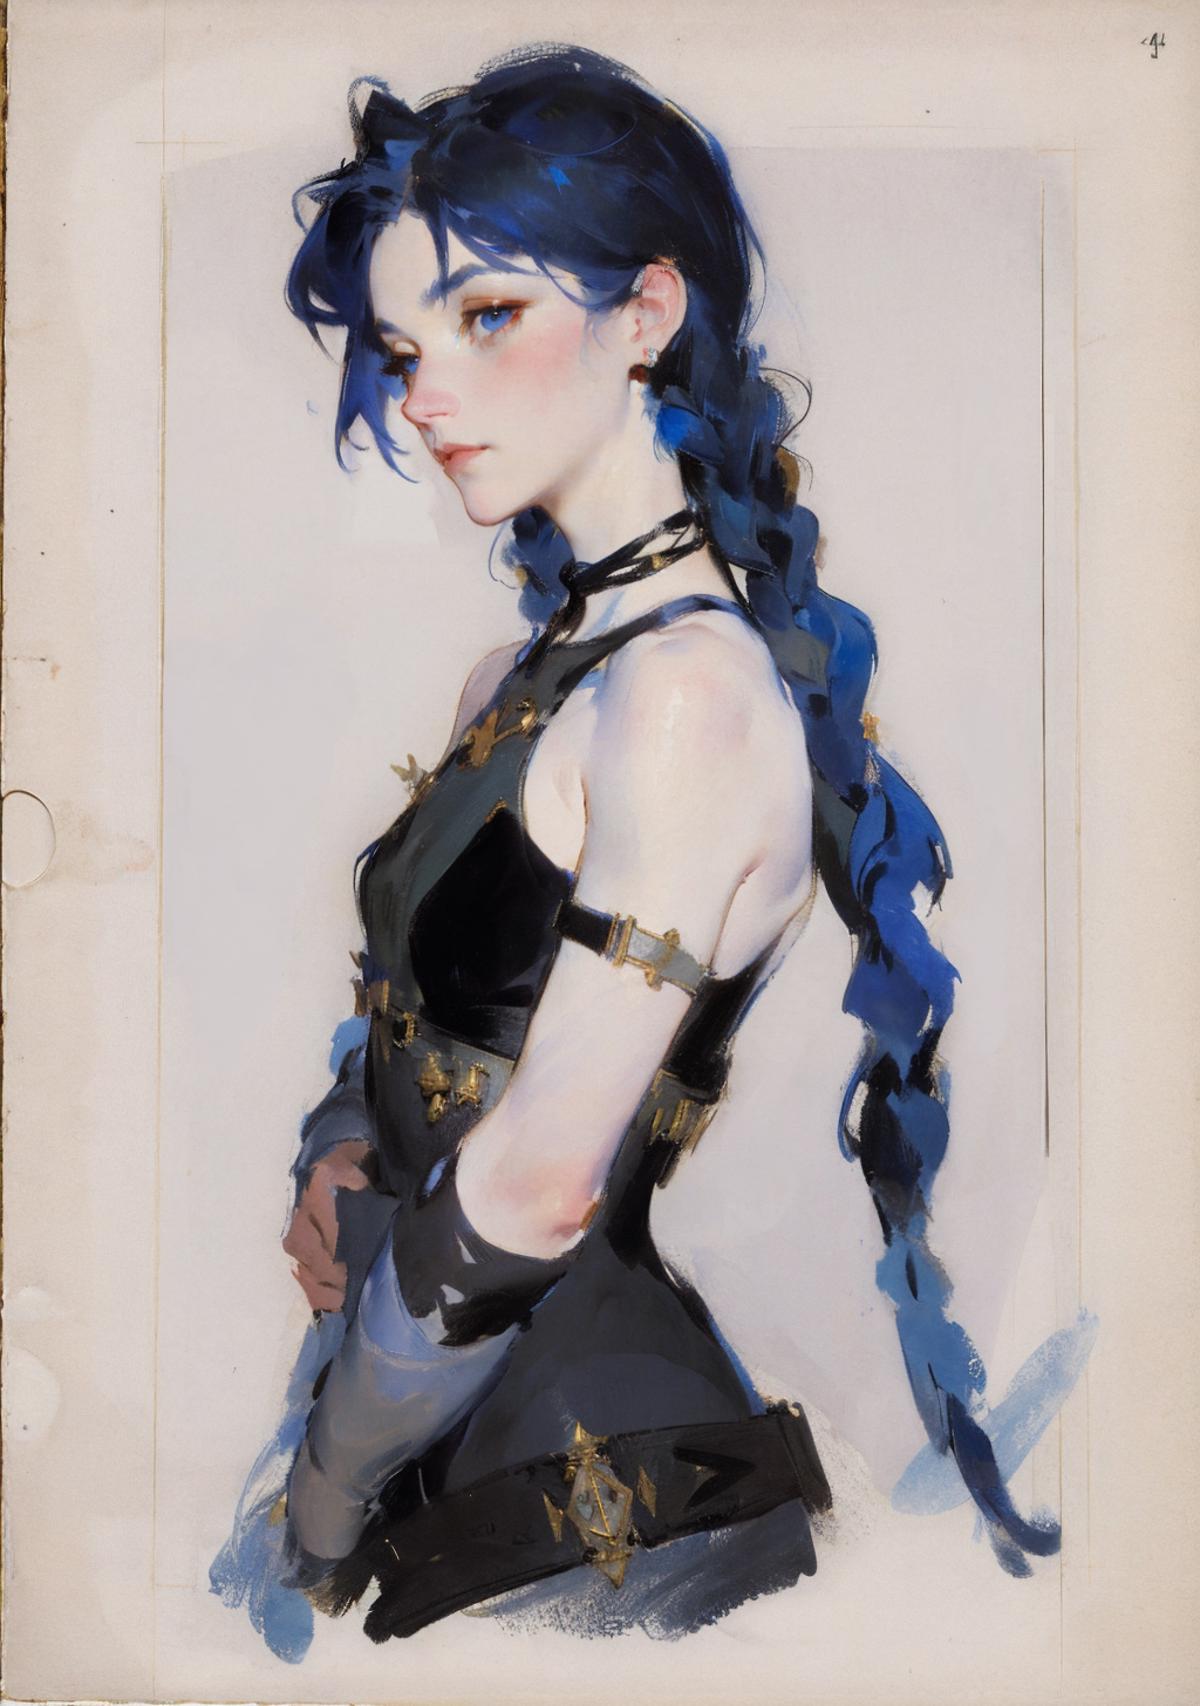 A drawing of a woman with blue hair and blue eyes is wearing a black dress.